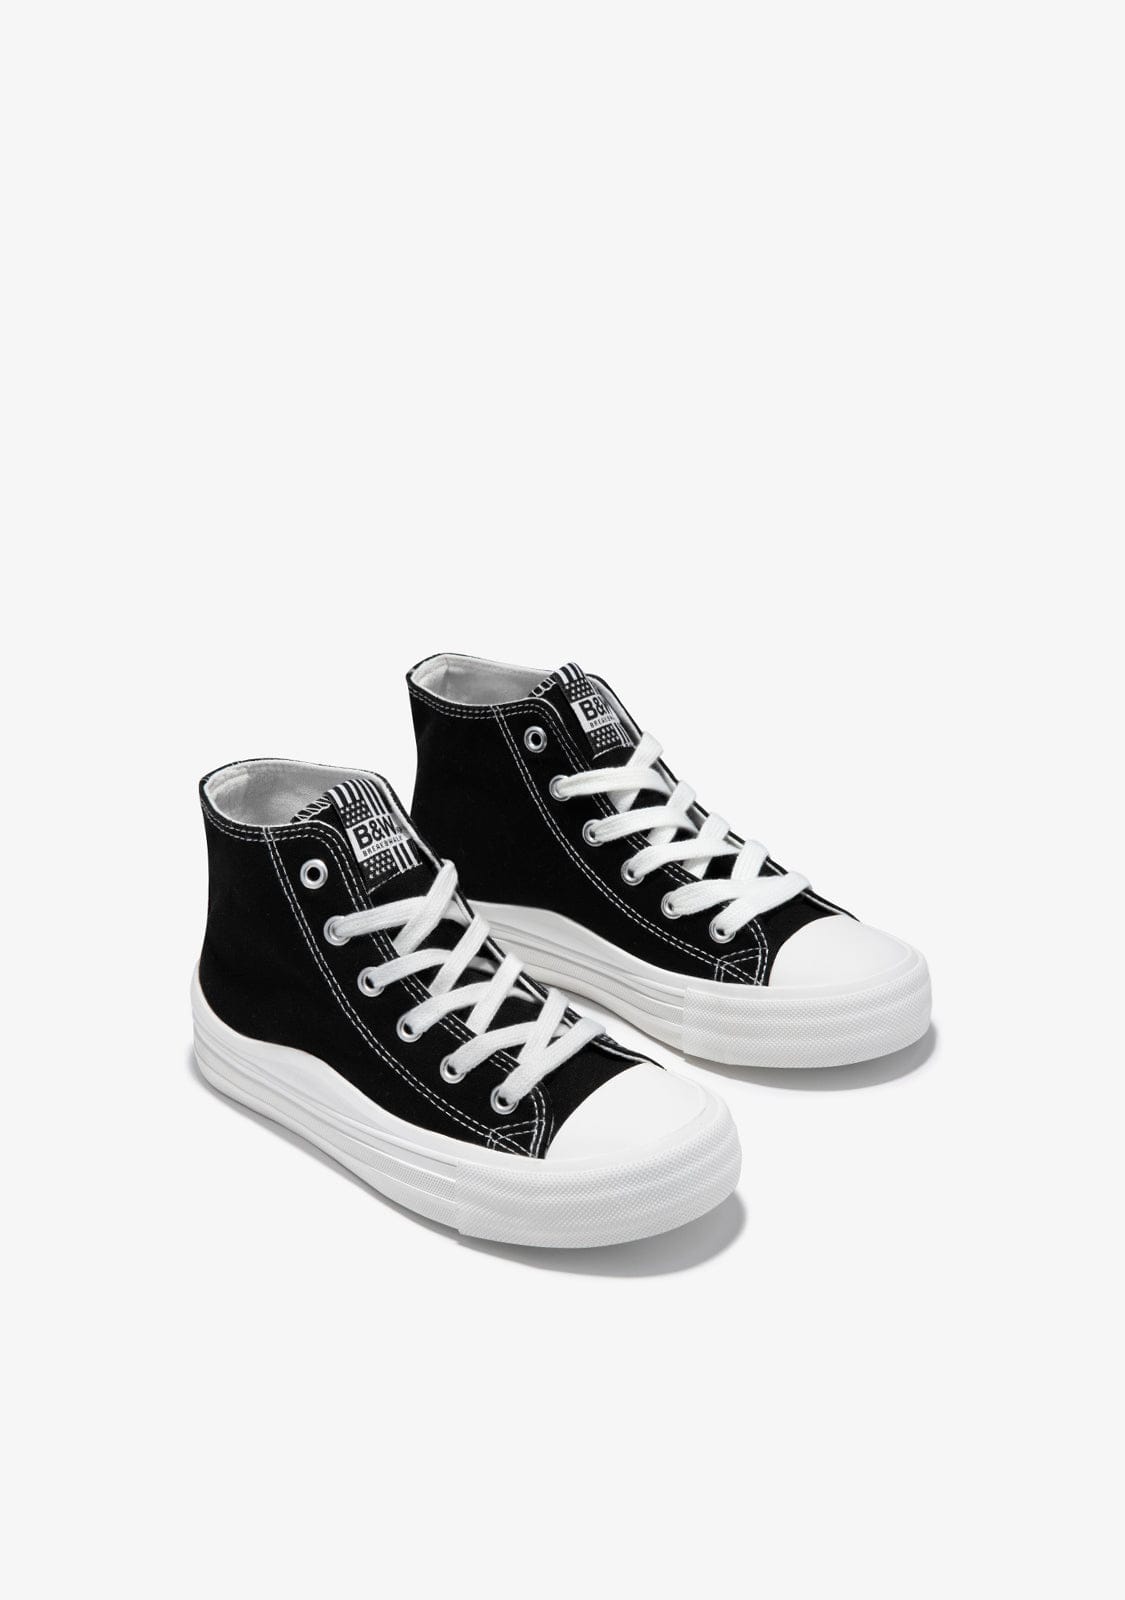 Black Canvas High Top Sneakers